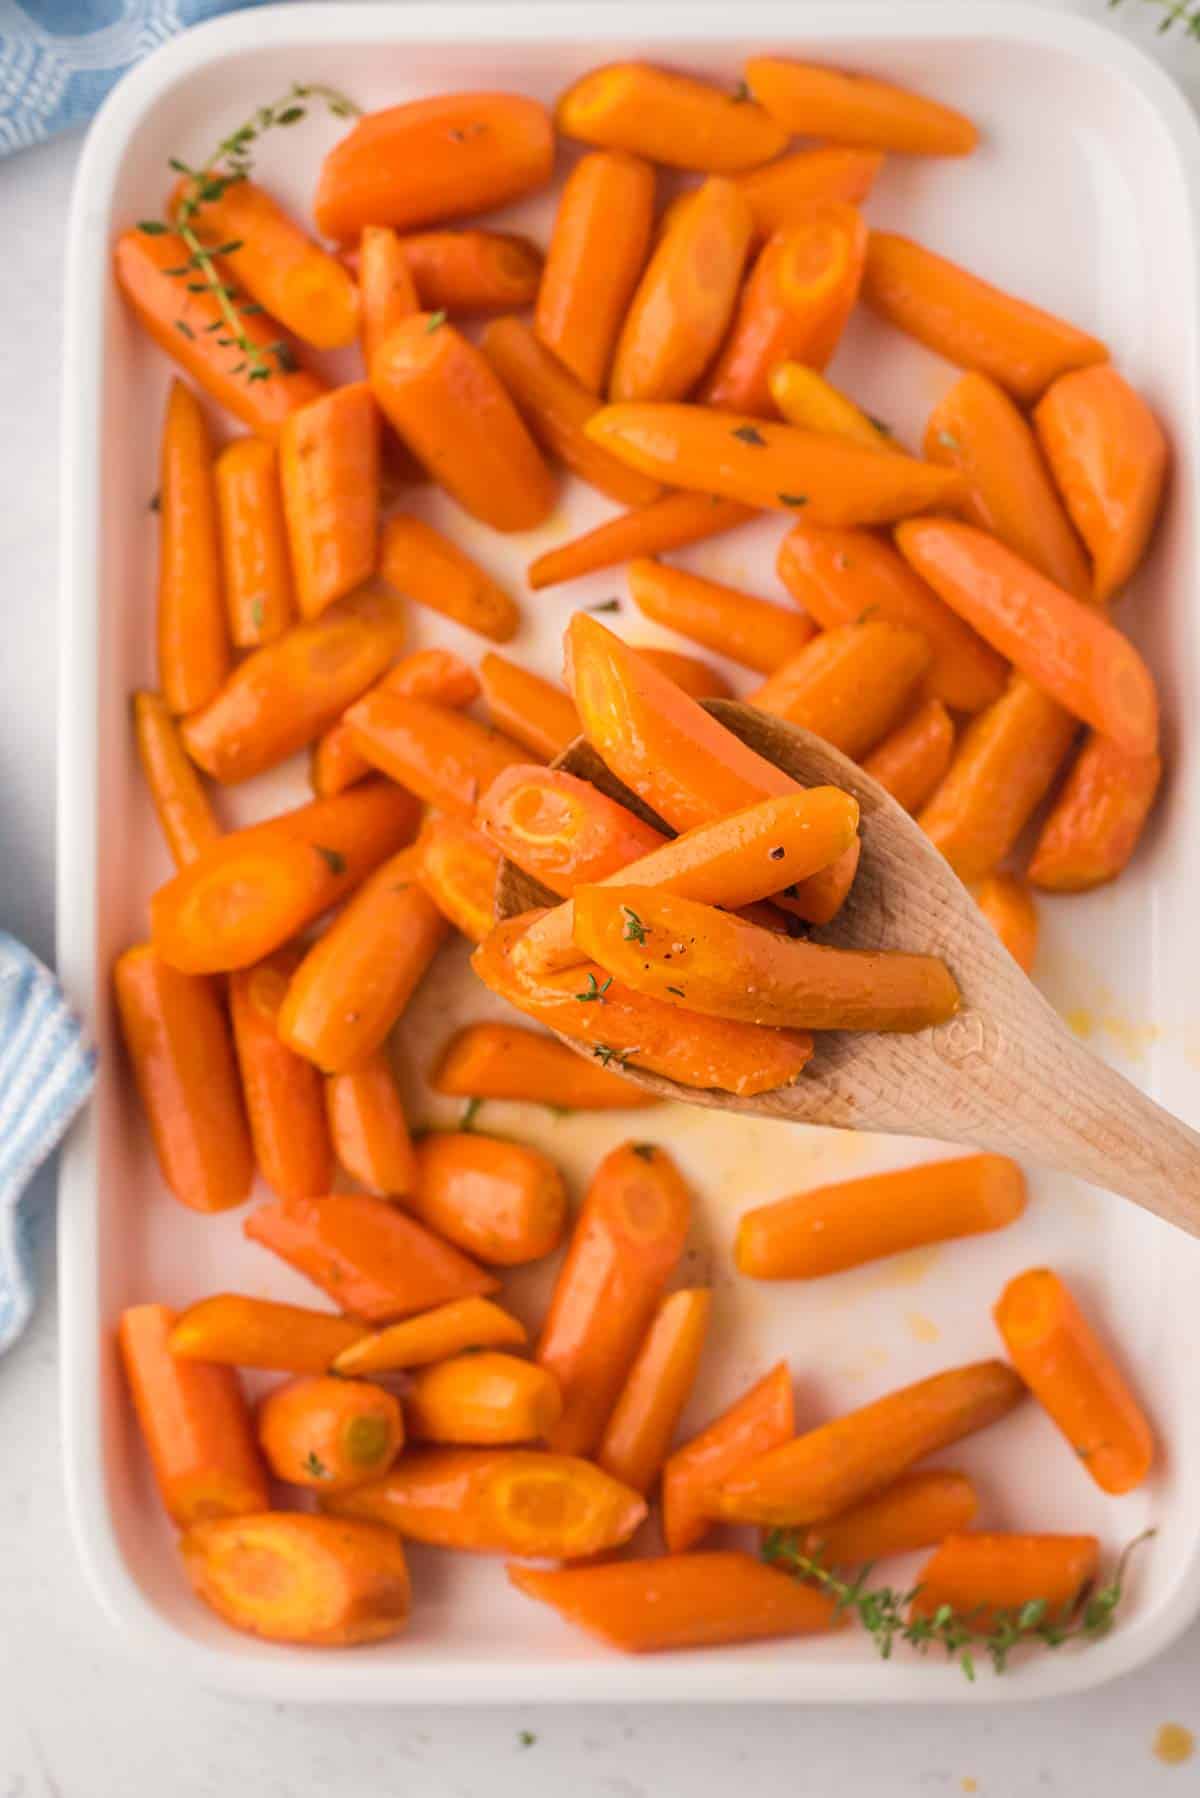 Roasted carrots scooped from a baking dish with a wooden spoon